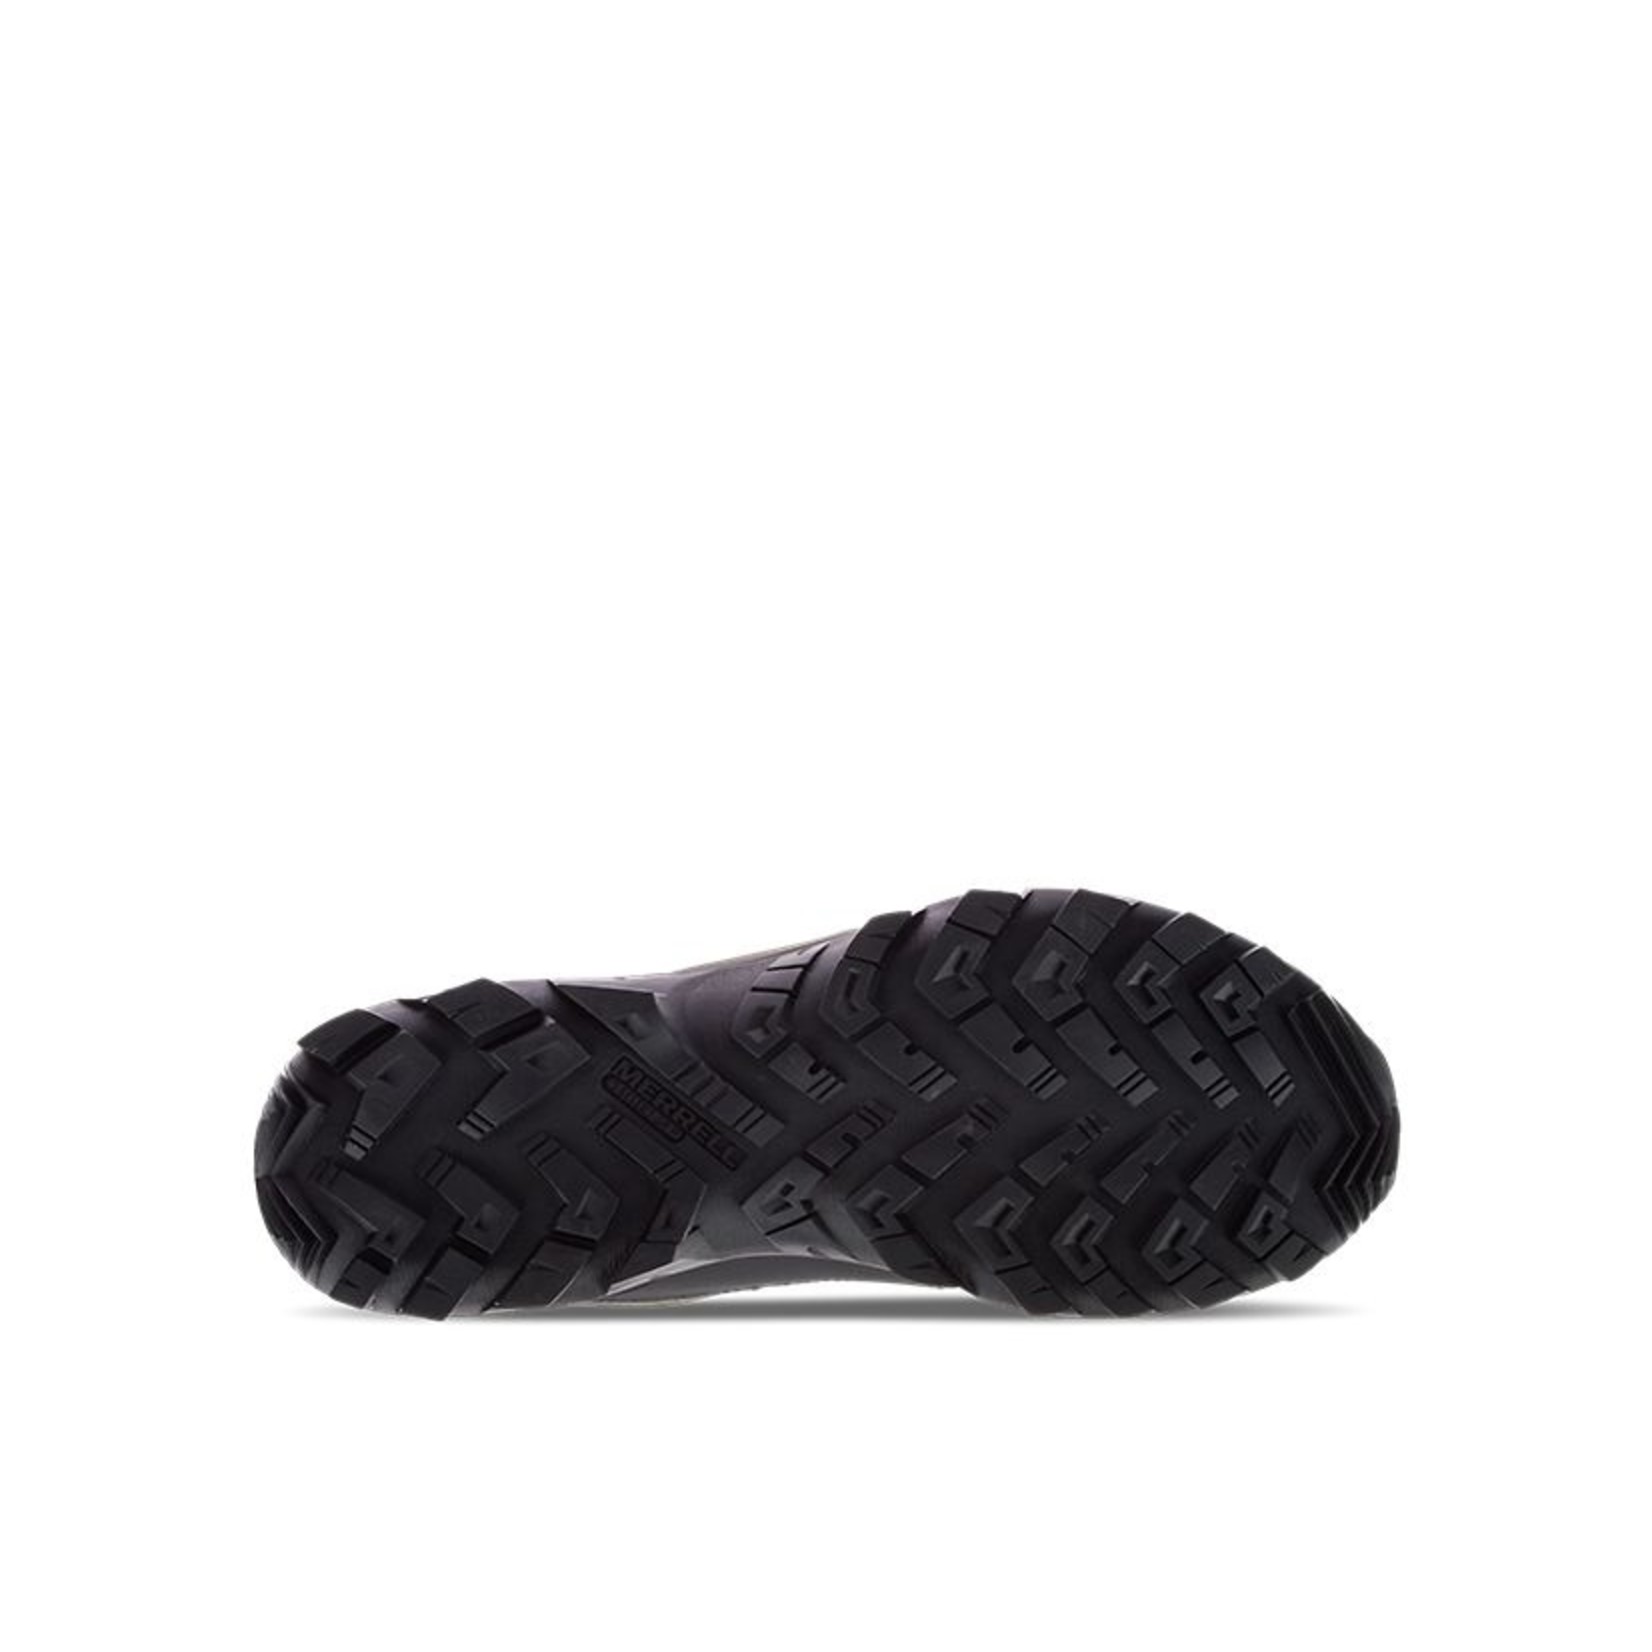 Merrell M Thermo Chill Mid Shell WP